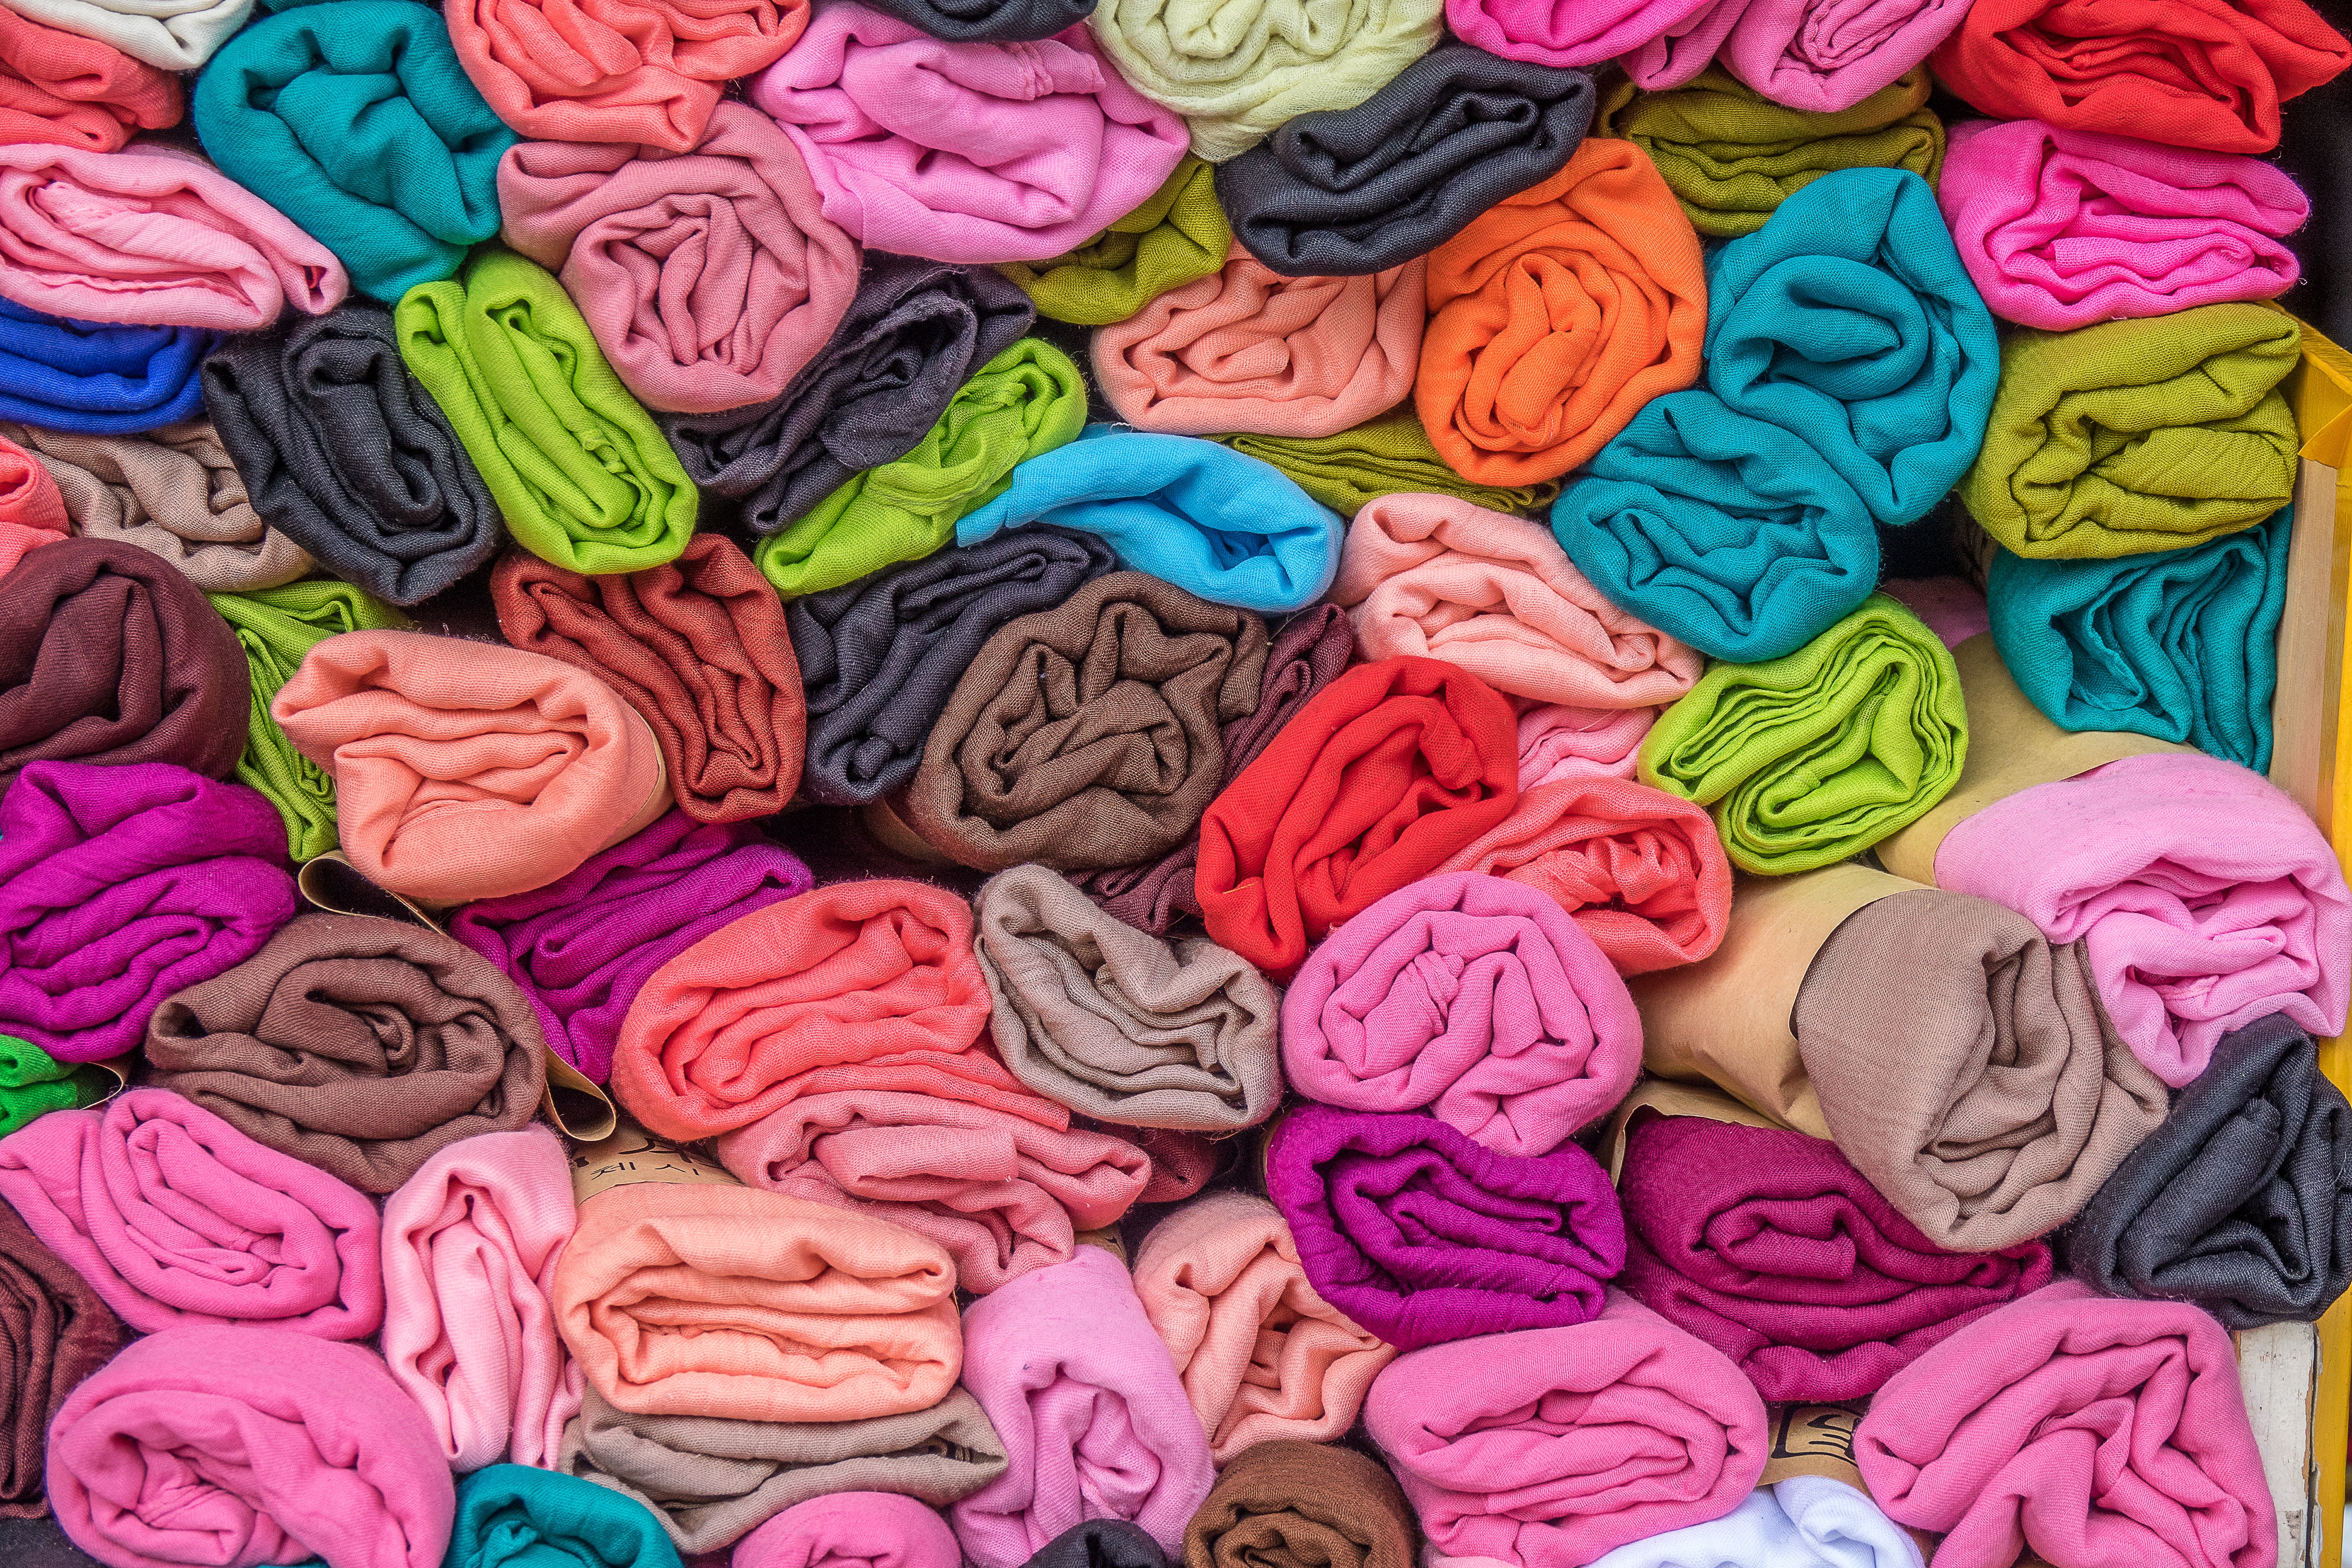 A pile of colorful fleece blankets